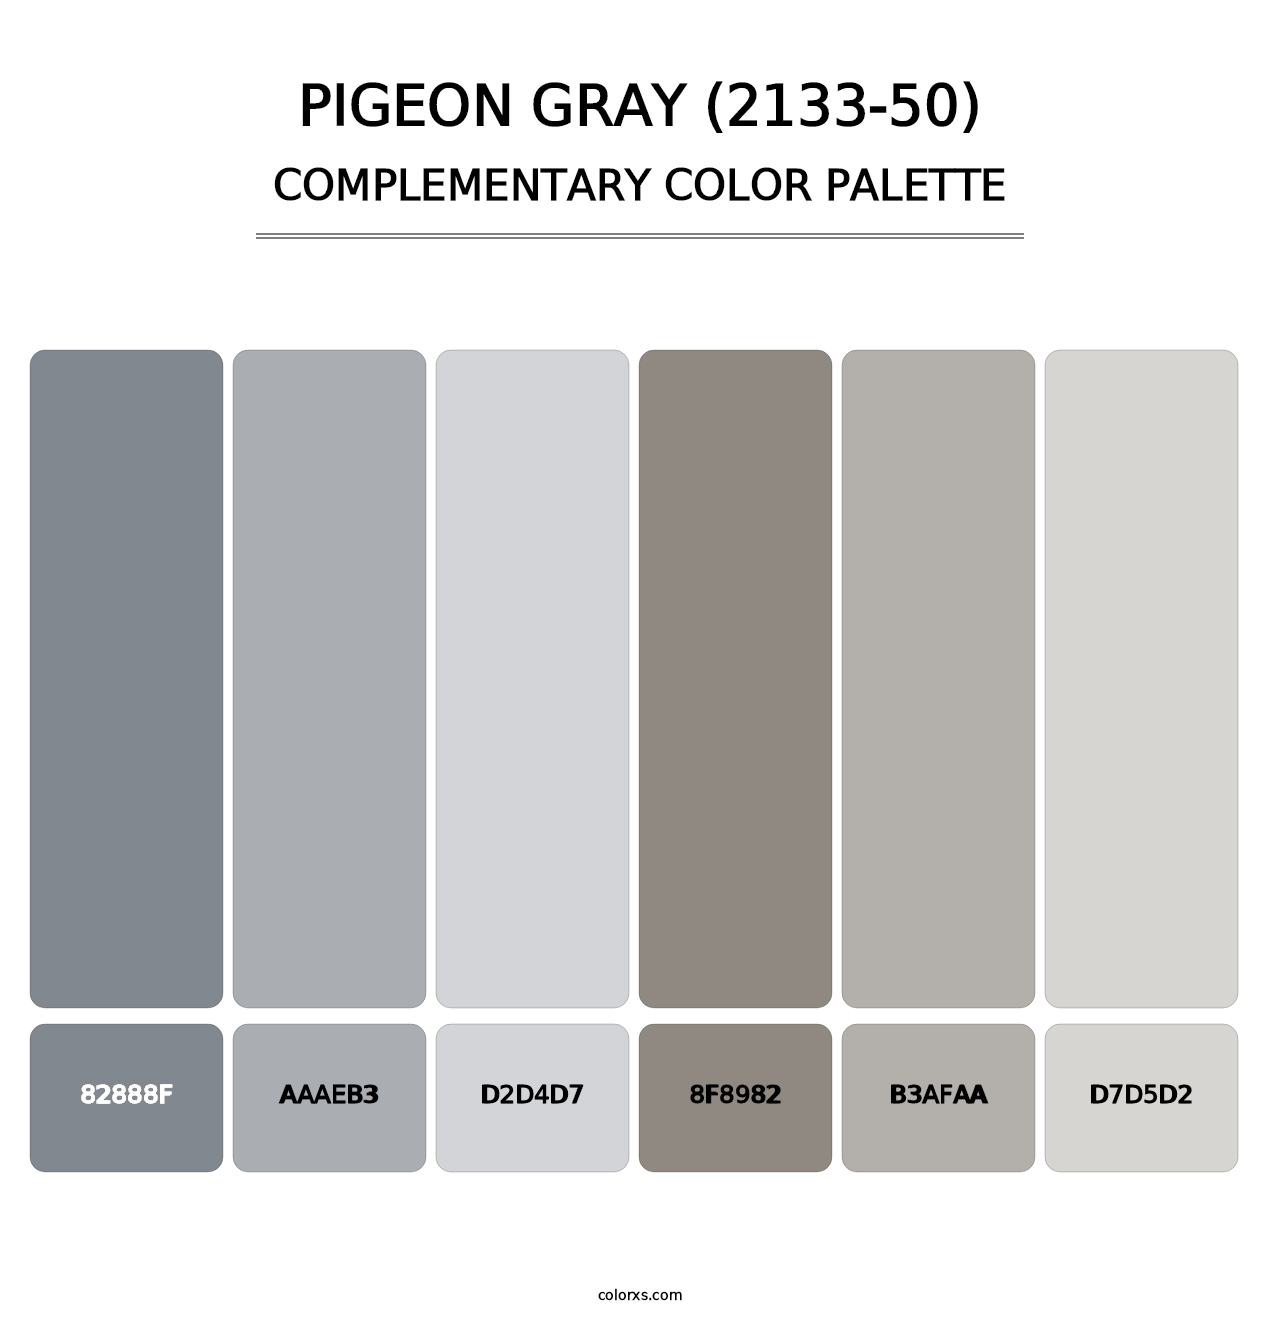 Pigeon Gray (2133-50) - Complementary Color Palette